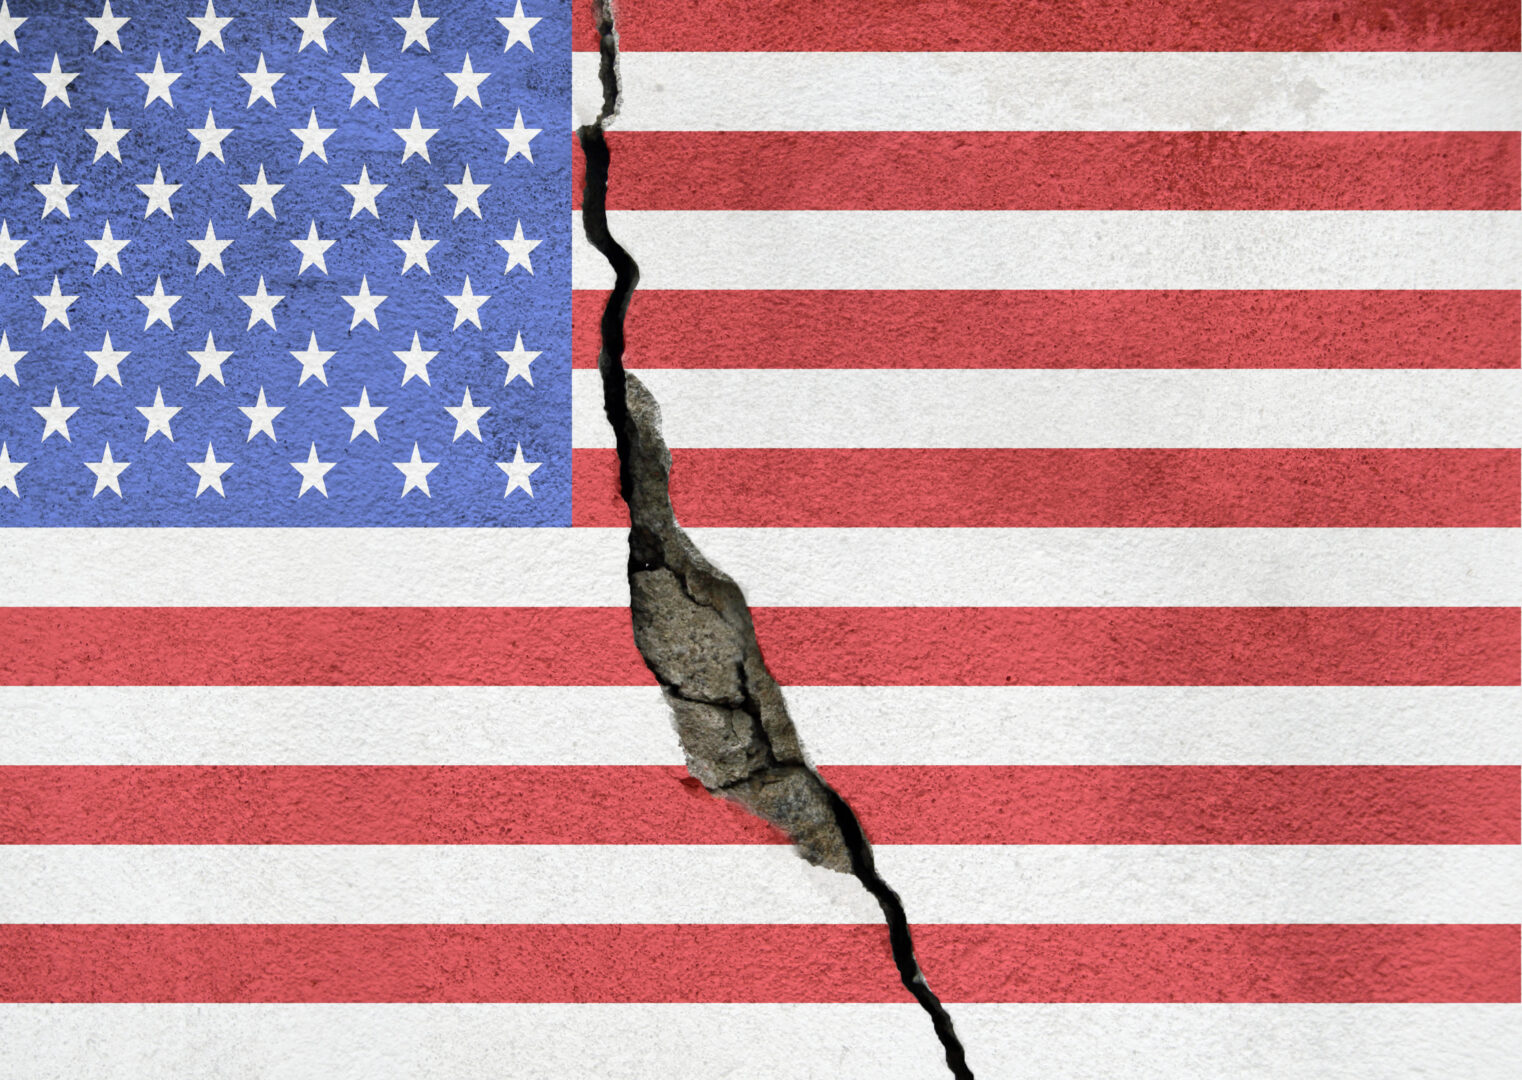 America divided concept, american flag on cracked background.  US elections, polarization and division between republicans and democrats, rich and poor, educated and non educated people